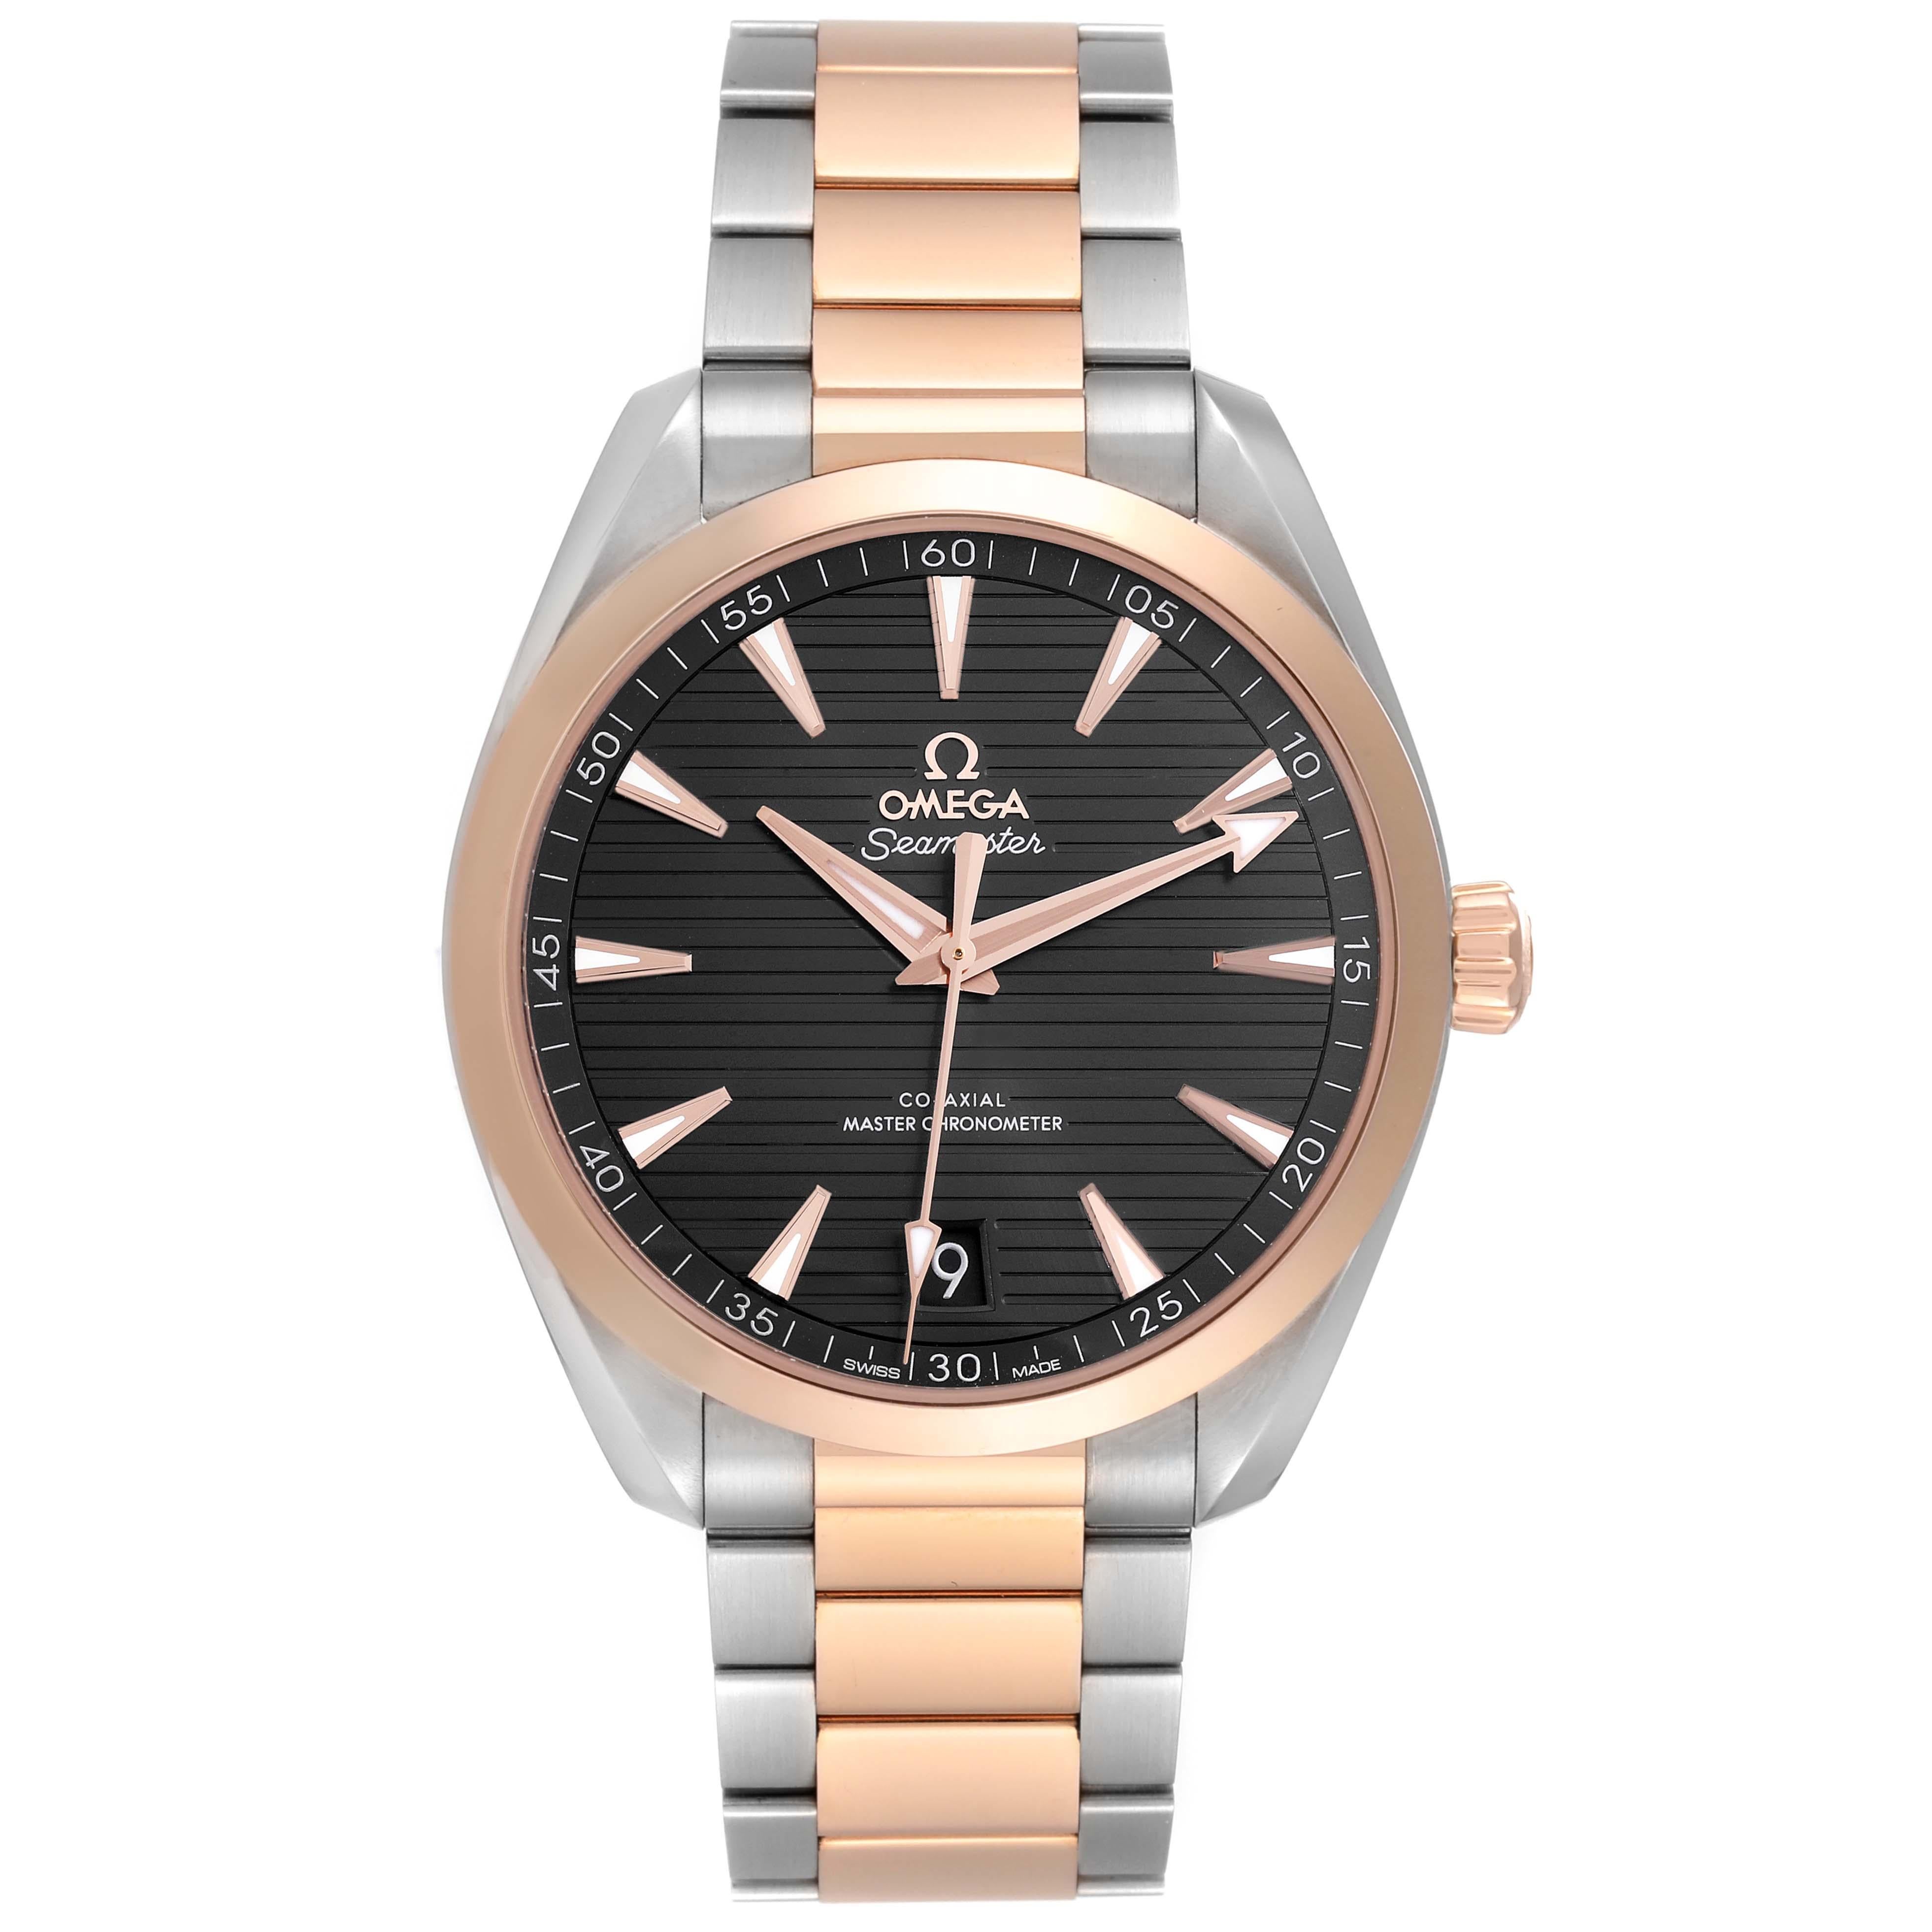 Omega Aqua Terra 41 Steel Rose Gold Mens Watch 220.20.41.21.06.001 Box Card. Automatic self-winding movement. Stainless steel and 18k rose gold case 41 mm in diameter. 18k rose gold crown signed with the Omega logo. Exhibition transparent sapphire